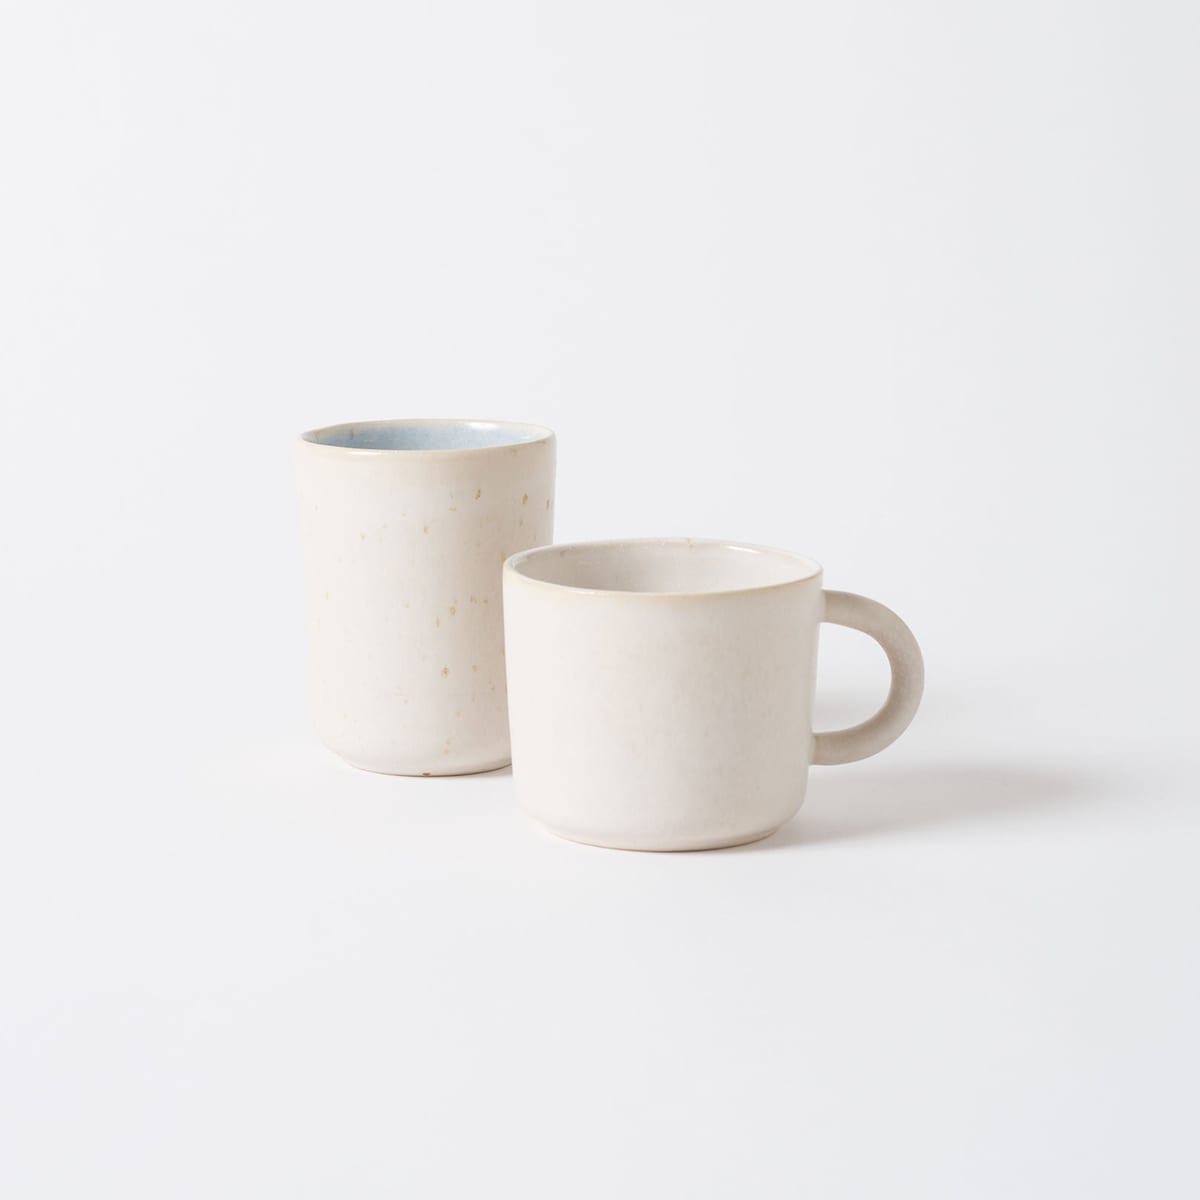 Finch Coffee Cup White/Natural - Set Of 4 - Styled Image by Citta Design